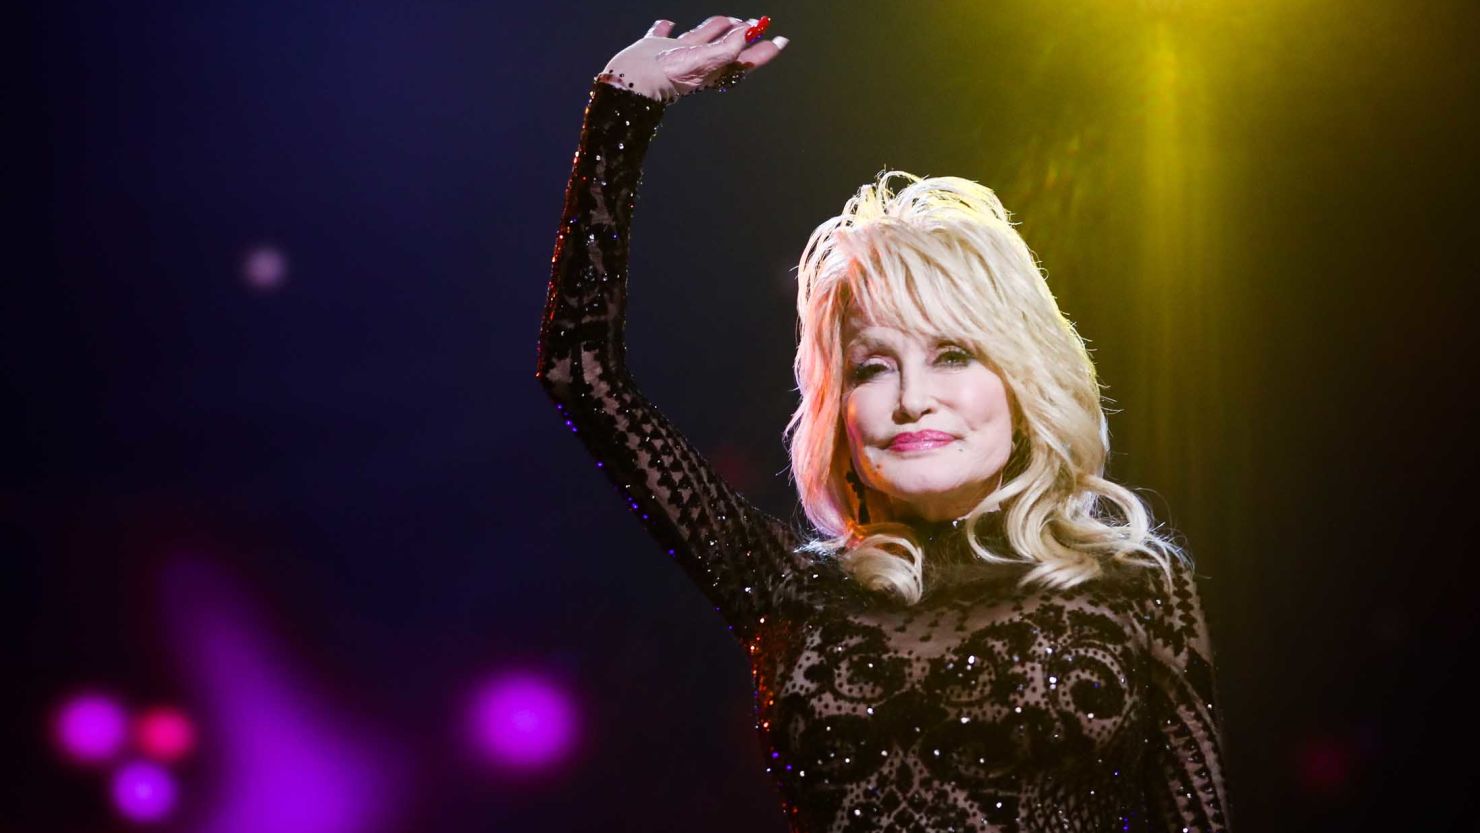 LOS ANGELES, CALIFORNIA - Dolly Parton attends MusiCares Person of the Year honoring Dolly Parton at Los Angeles Convention Center on February 08, 2019.